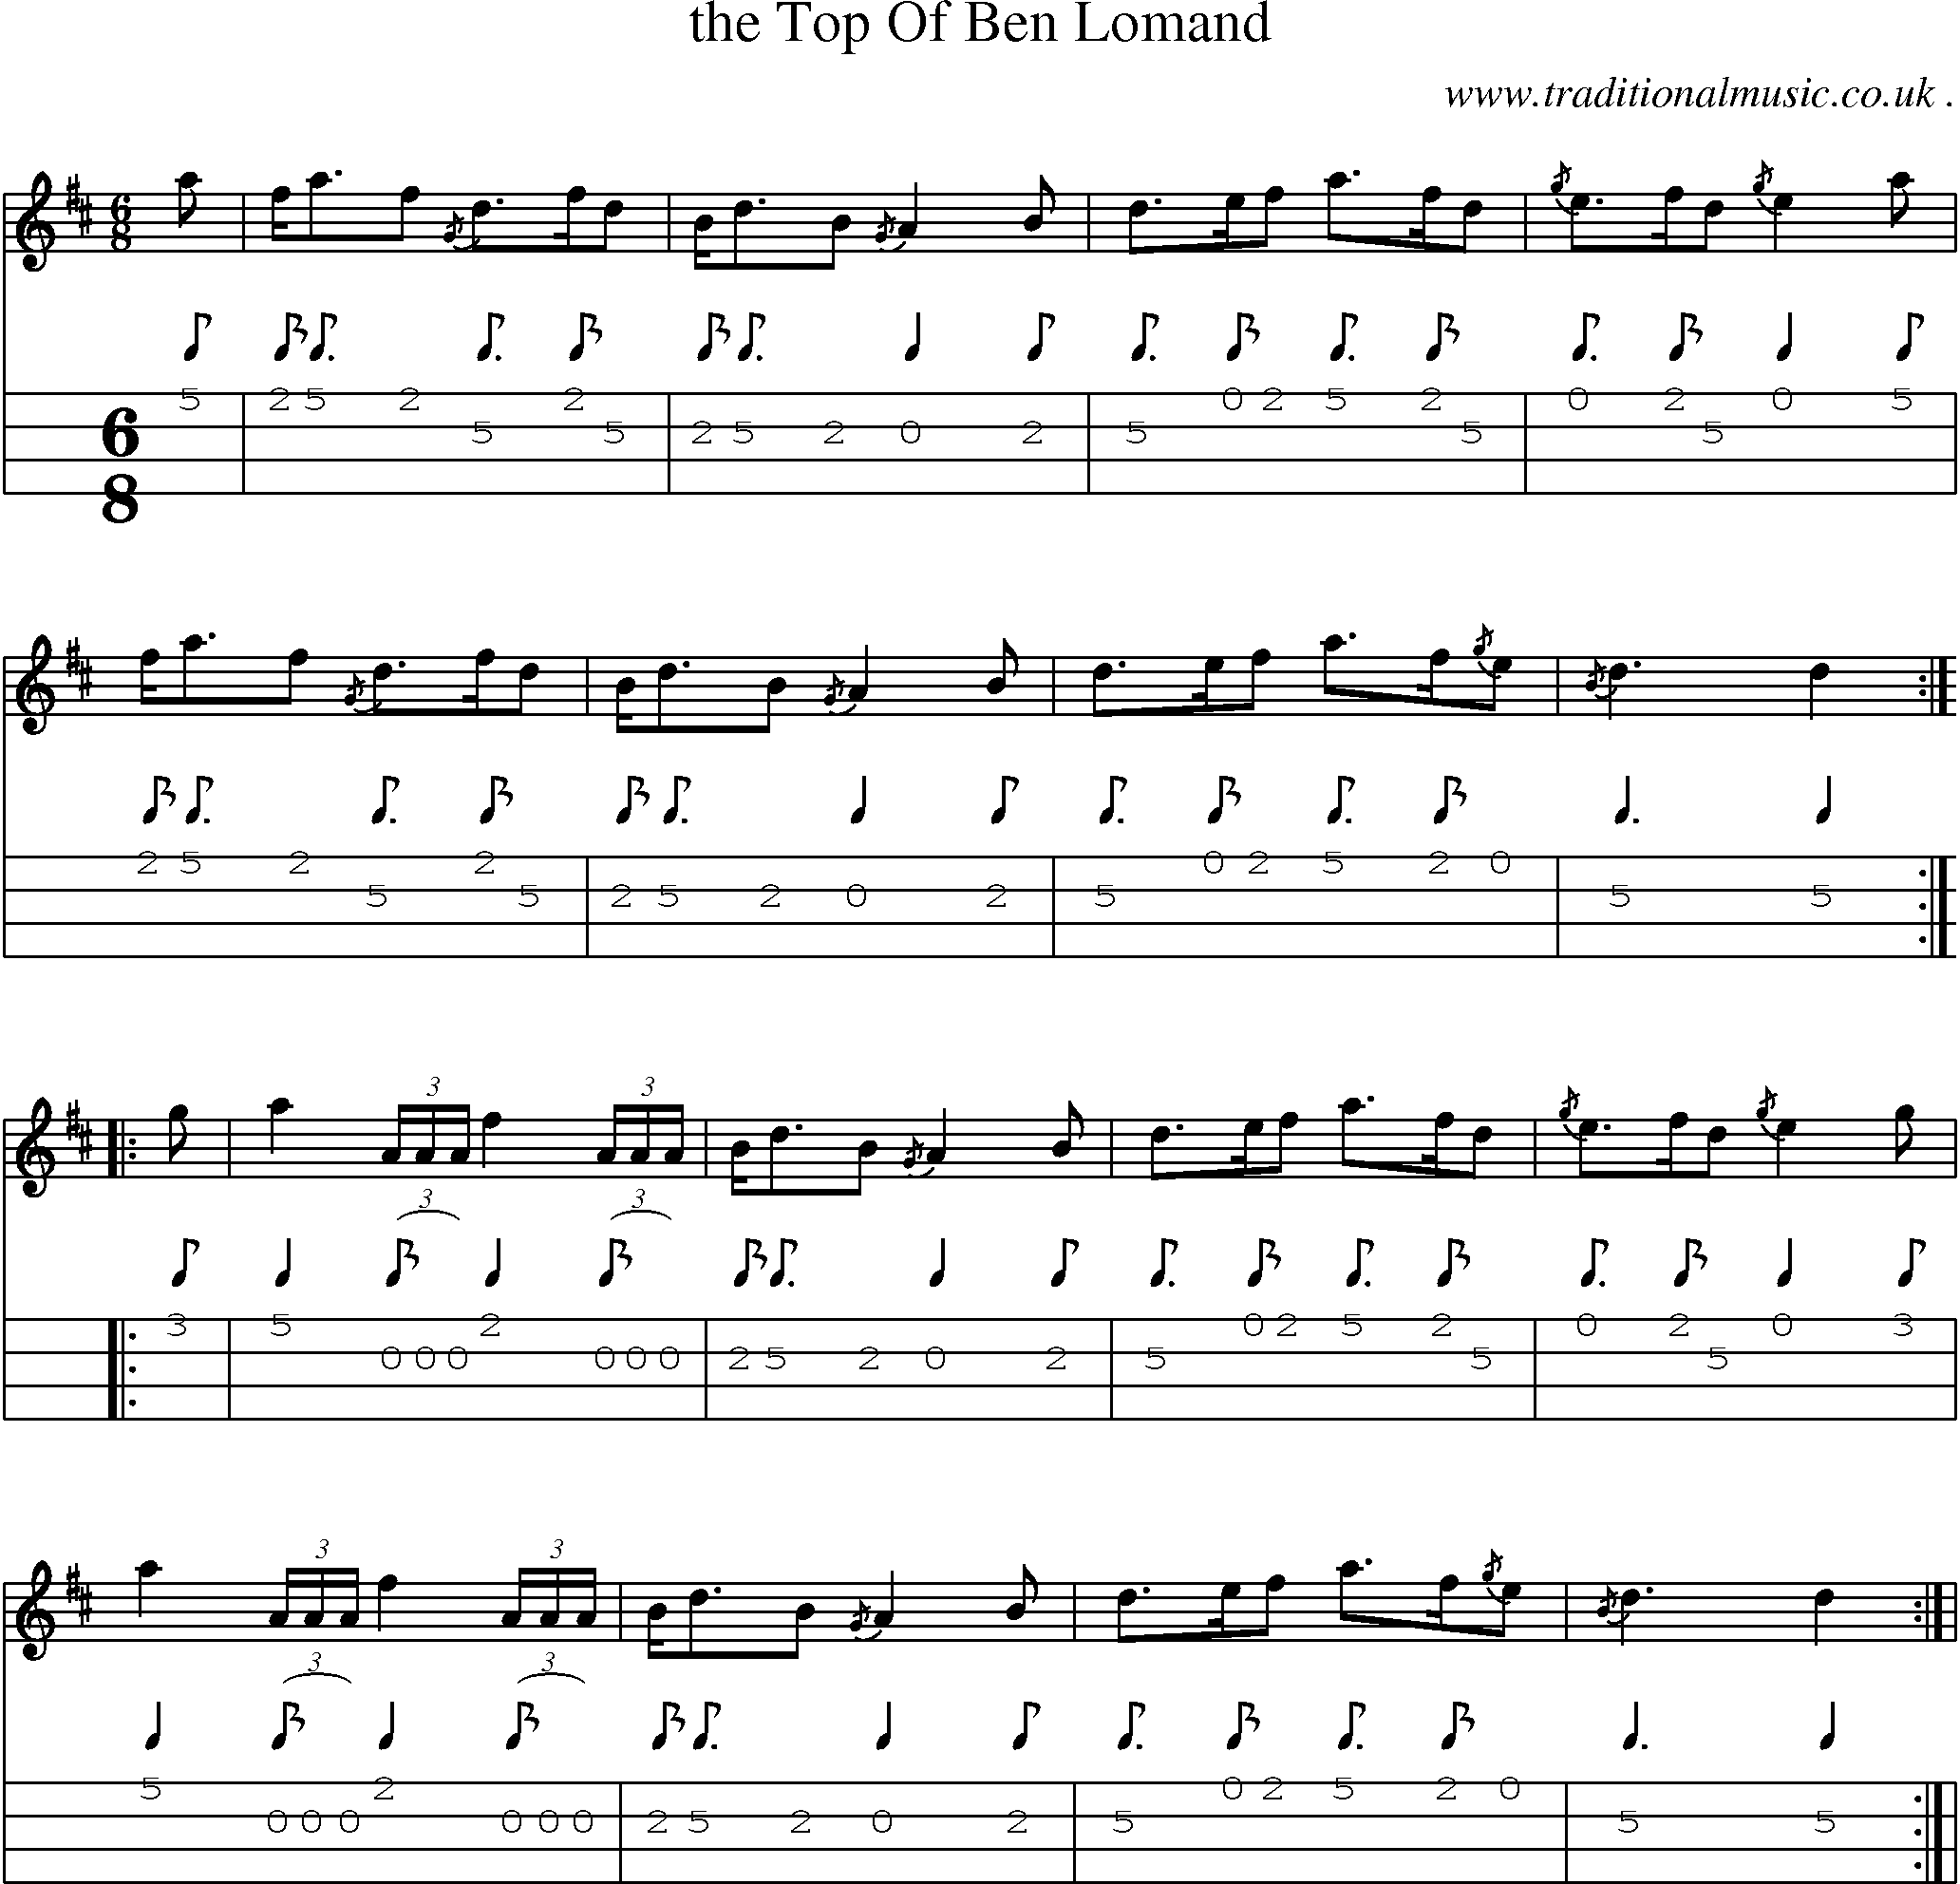 Sheet-music  score, Chords and Mandolin Tabs for The Top Of Ben Lomand